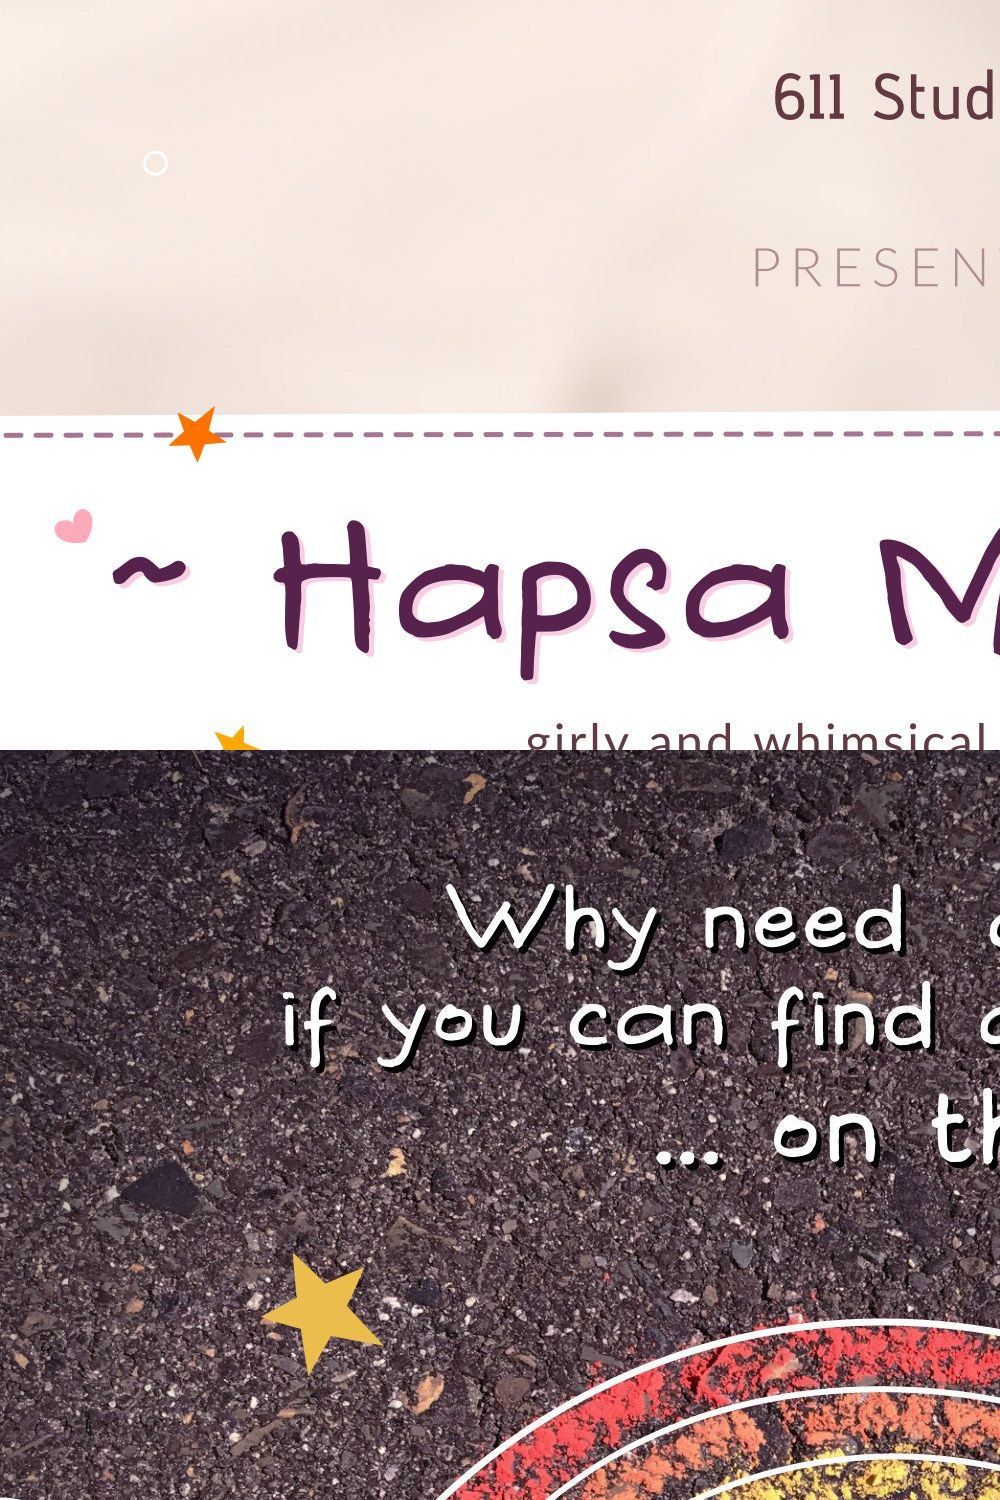 Hapsa Marker ~ Girly and whimsical pinterest preview image.